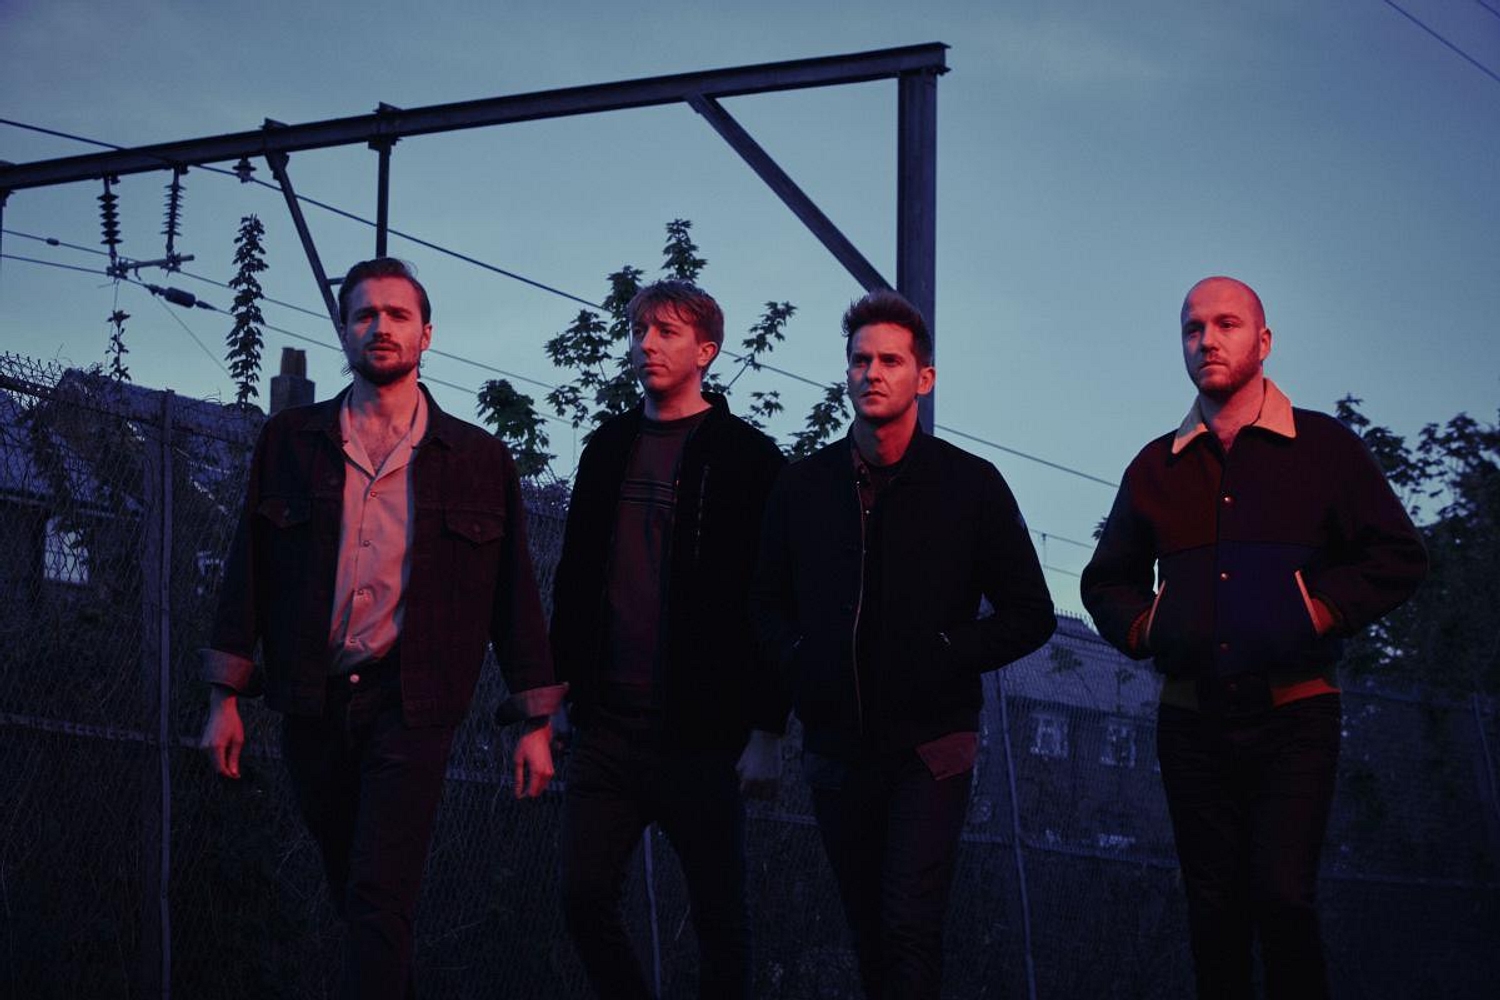 ​Tracks: Wild Beasts, The Strokes and more​